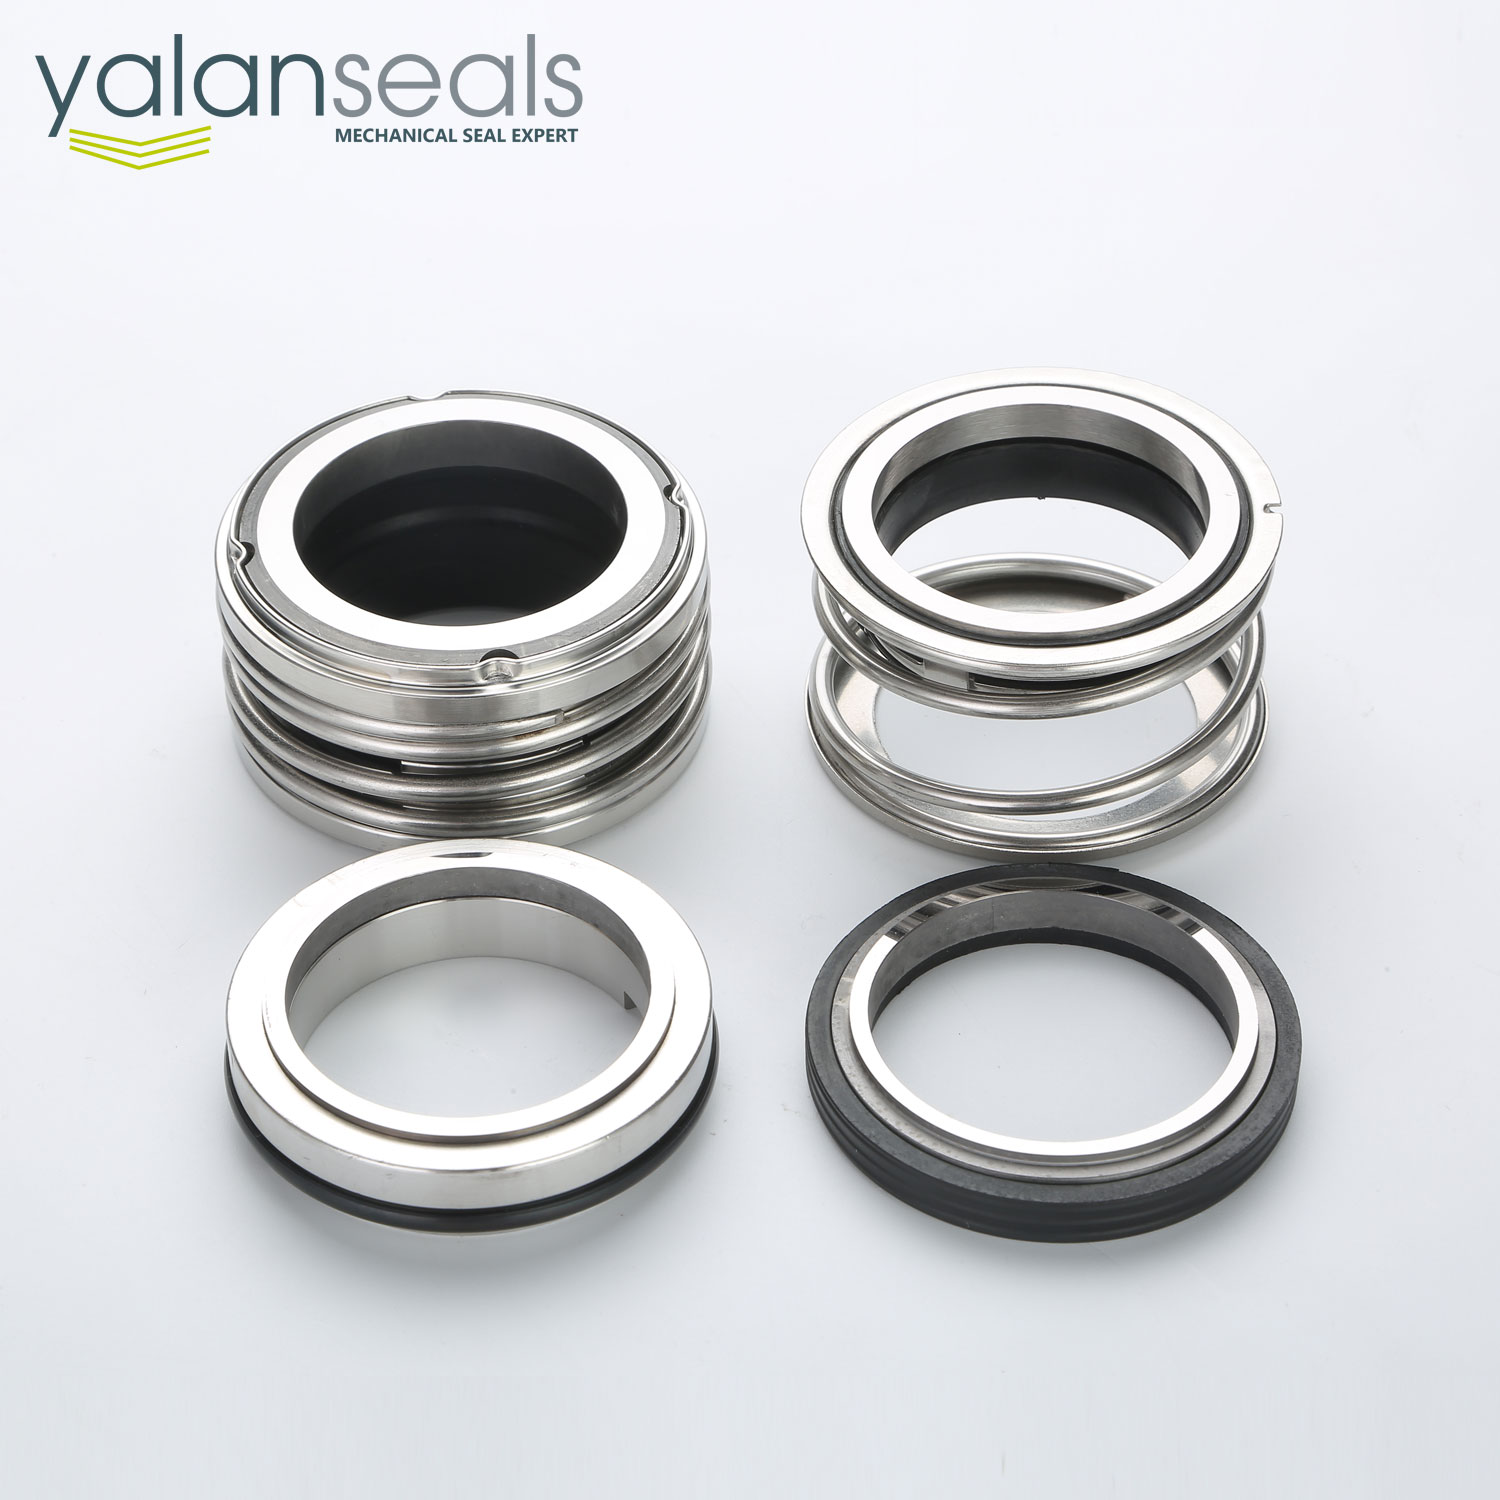 YALAN 128 Rubber Bellow Mechanical Seal works with YL110 Seal as Double Seal